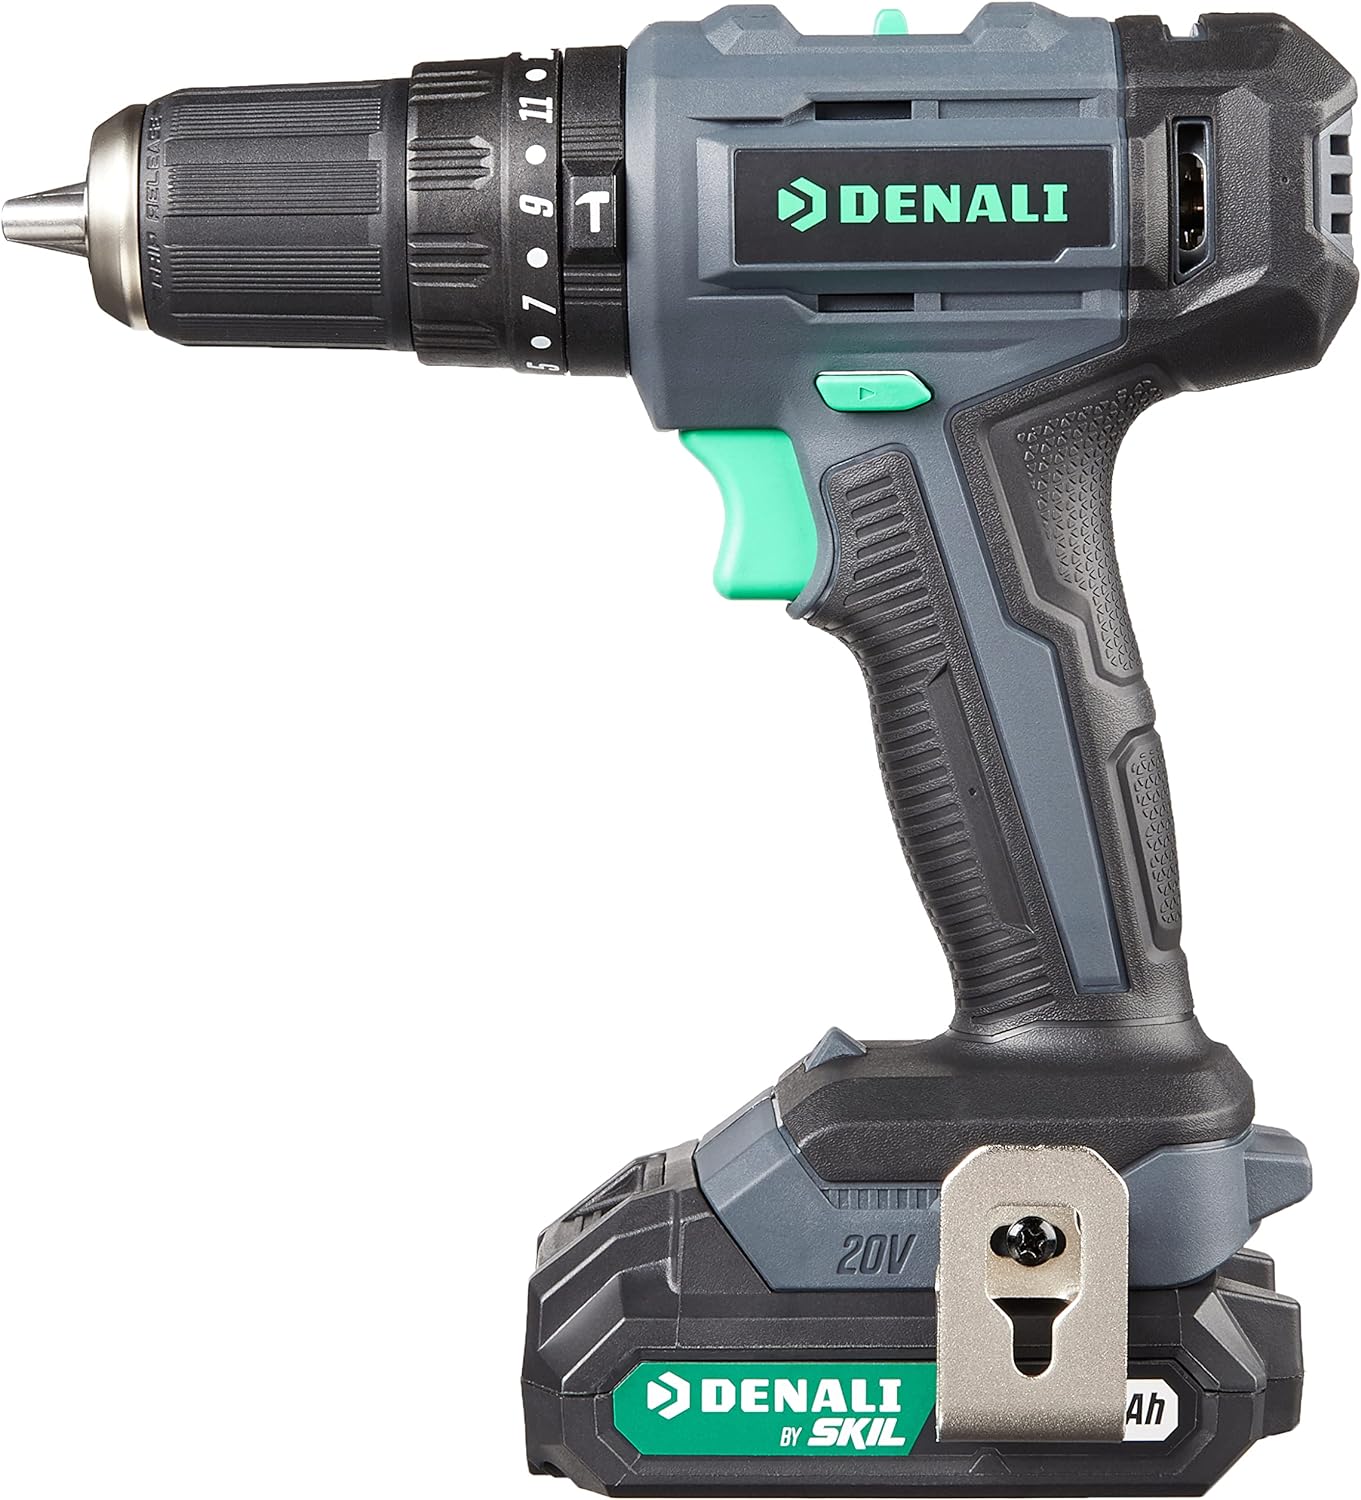 Amazon Brand - Denali By Skil 20V Cordless Hammer Drill Kit With 2 X 2.0Ah Lithium Batteries And Charger, Blue